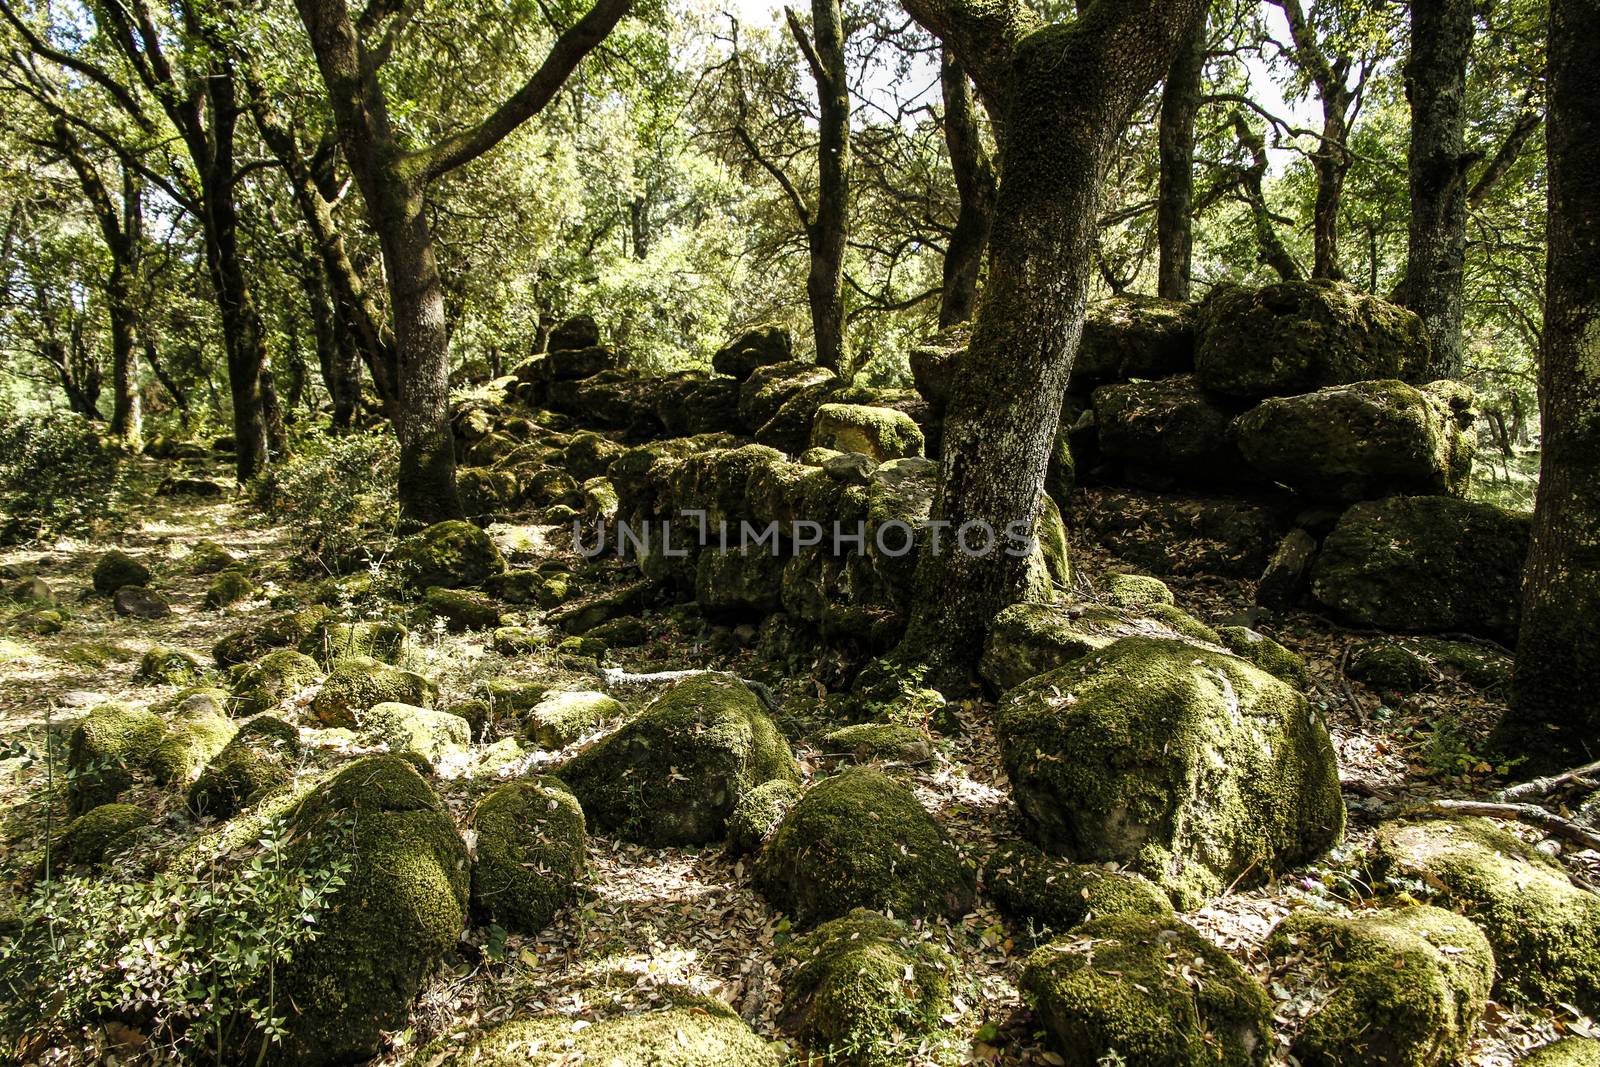 The sun's rays filter through the branches of dense vegetation in the forest with moss-covered boulders